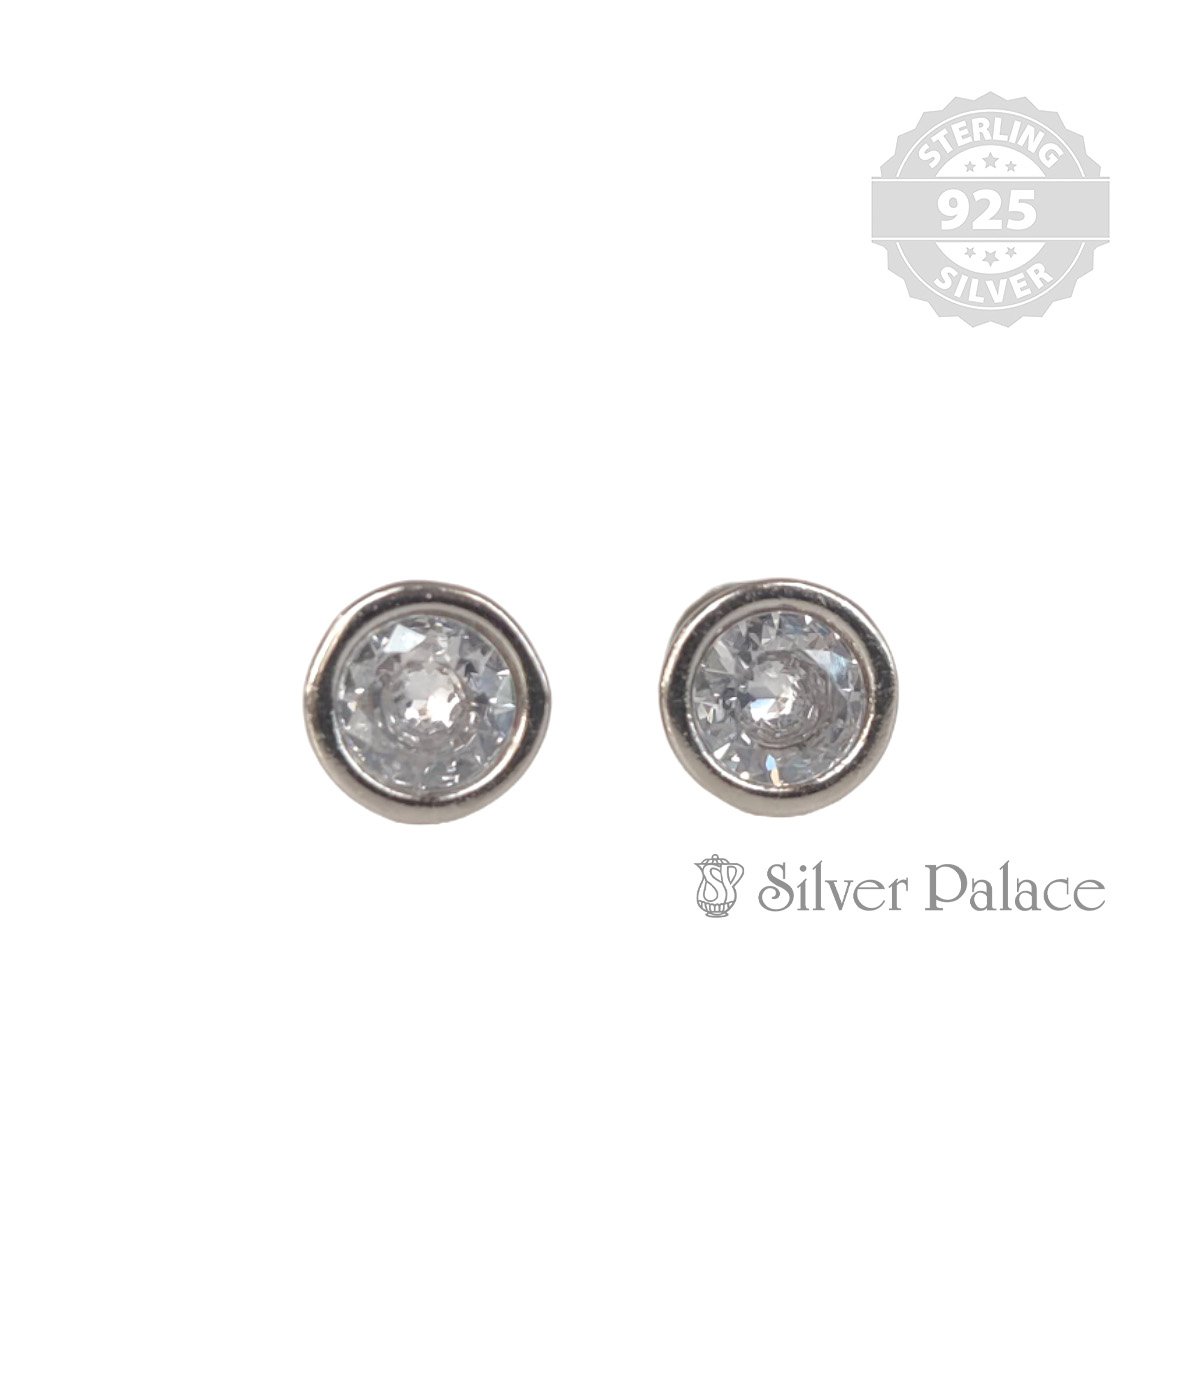 92.5 STERLING SILVER SINGLE STONE STUD FOR GIRLS